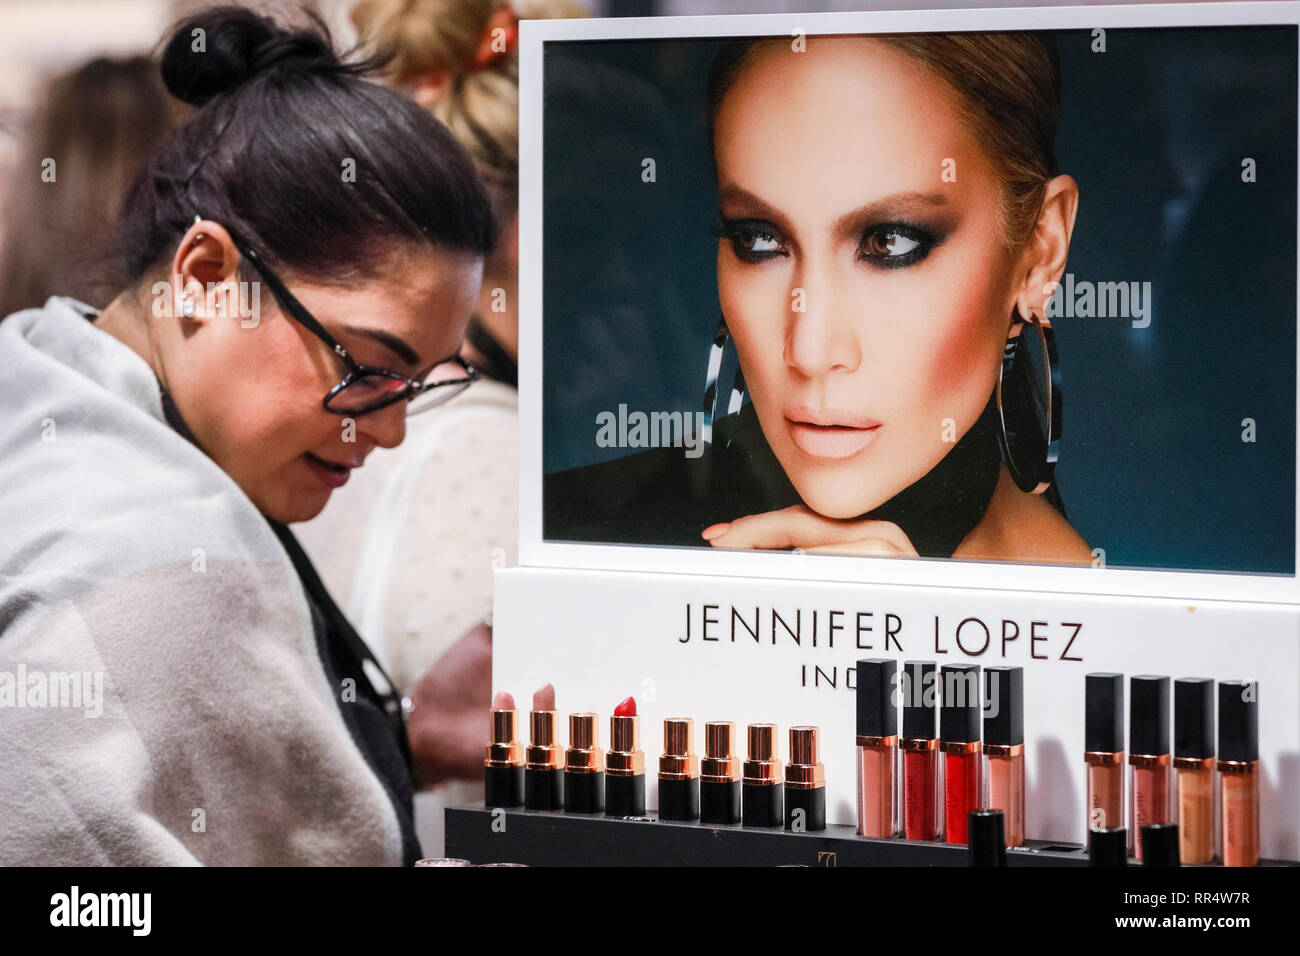 ExCel London, London, UK , 24th Feb 2019.  A woman looks at 'Jennifer Lopez' makeup. The Professional Beauty show brings together hair and beauty practitioners, cosmetics and aesthetics professionals,  and representatives of over 800 brands with those interested in hair and beauty in the UK's biggest industry event at ExCel London Exhibition Centre on Fb 24 and 25. Credit: Imageplotter/Alamy Live News Stock Photo